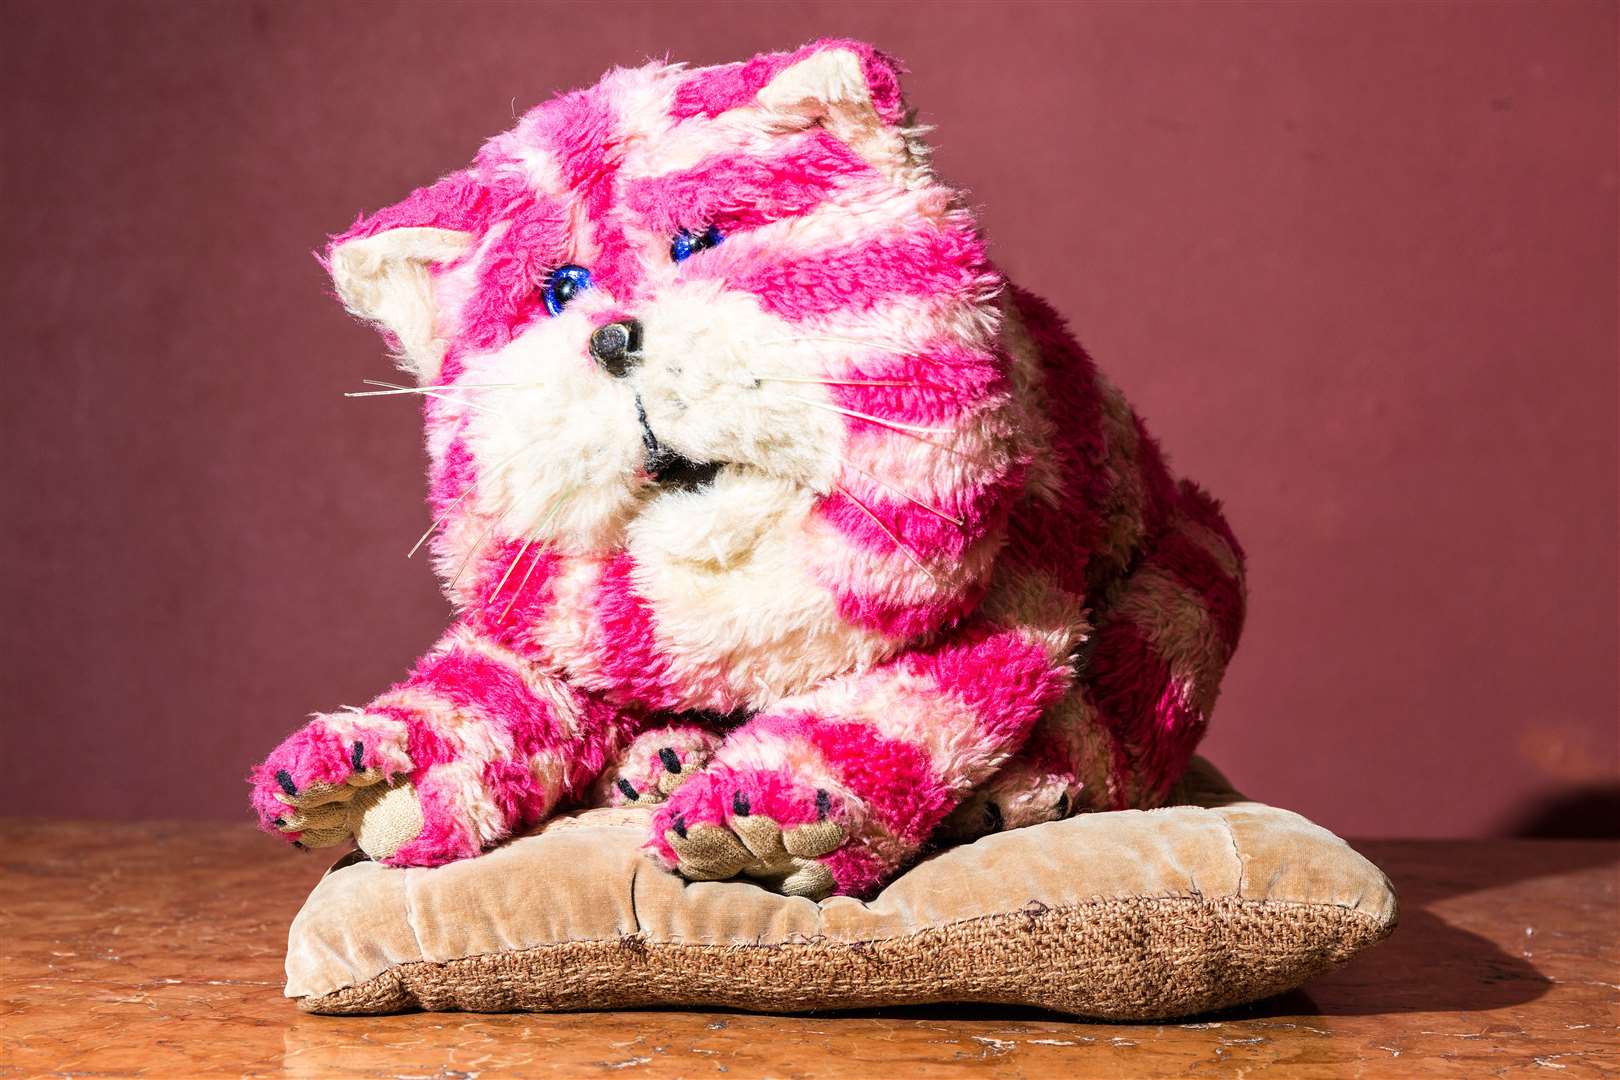 Bagpuss can be seen - once it reopens - at The Beaney in Canterbury. Picture: The Beaney